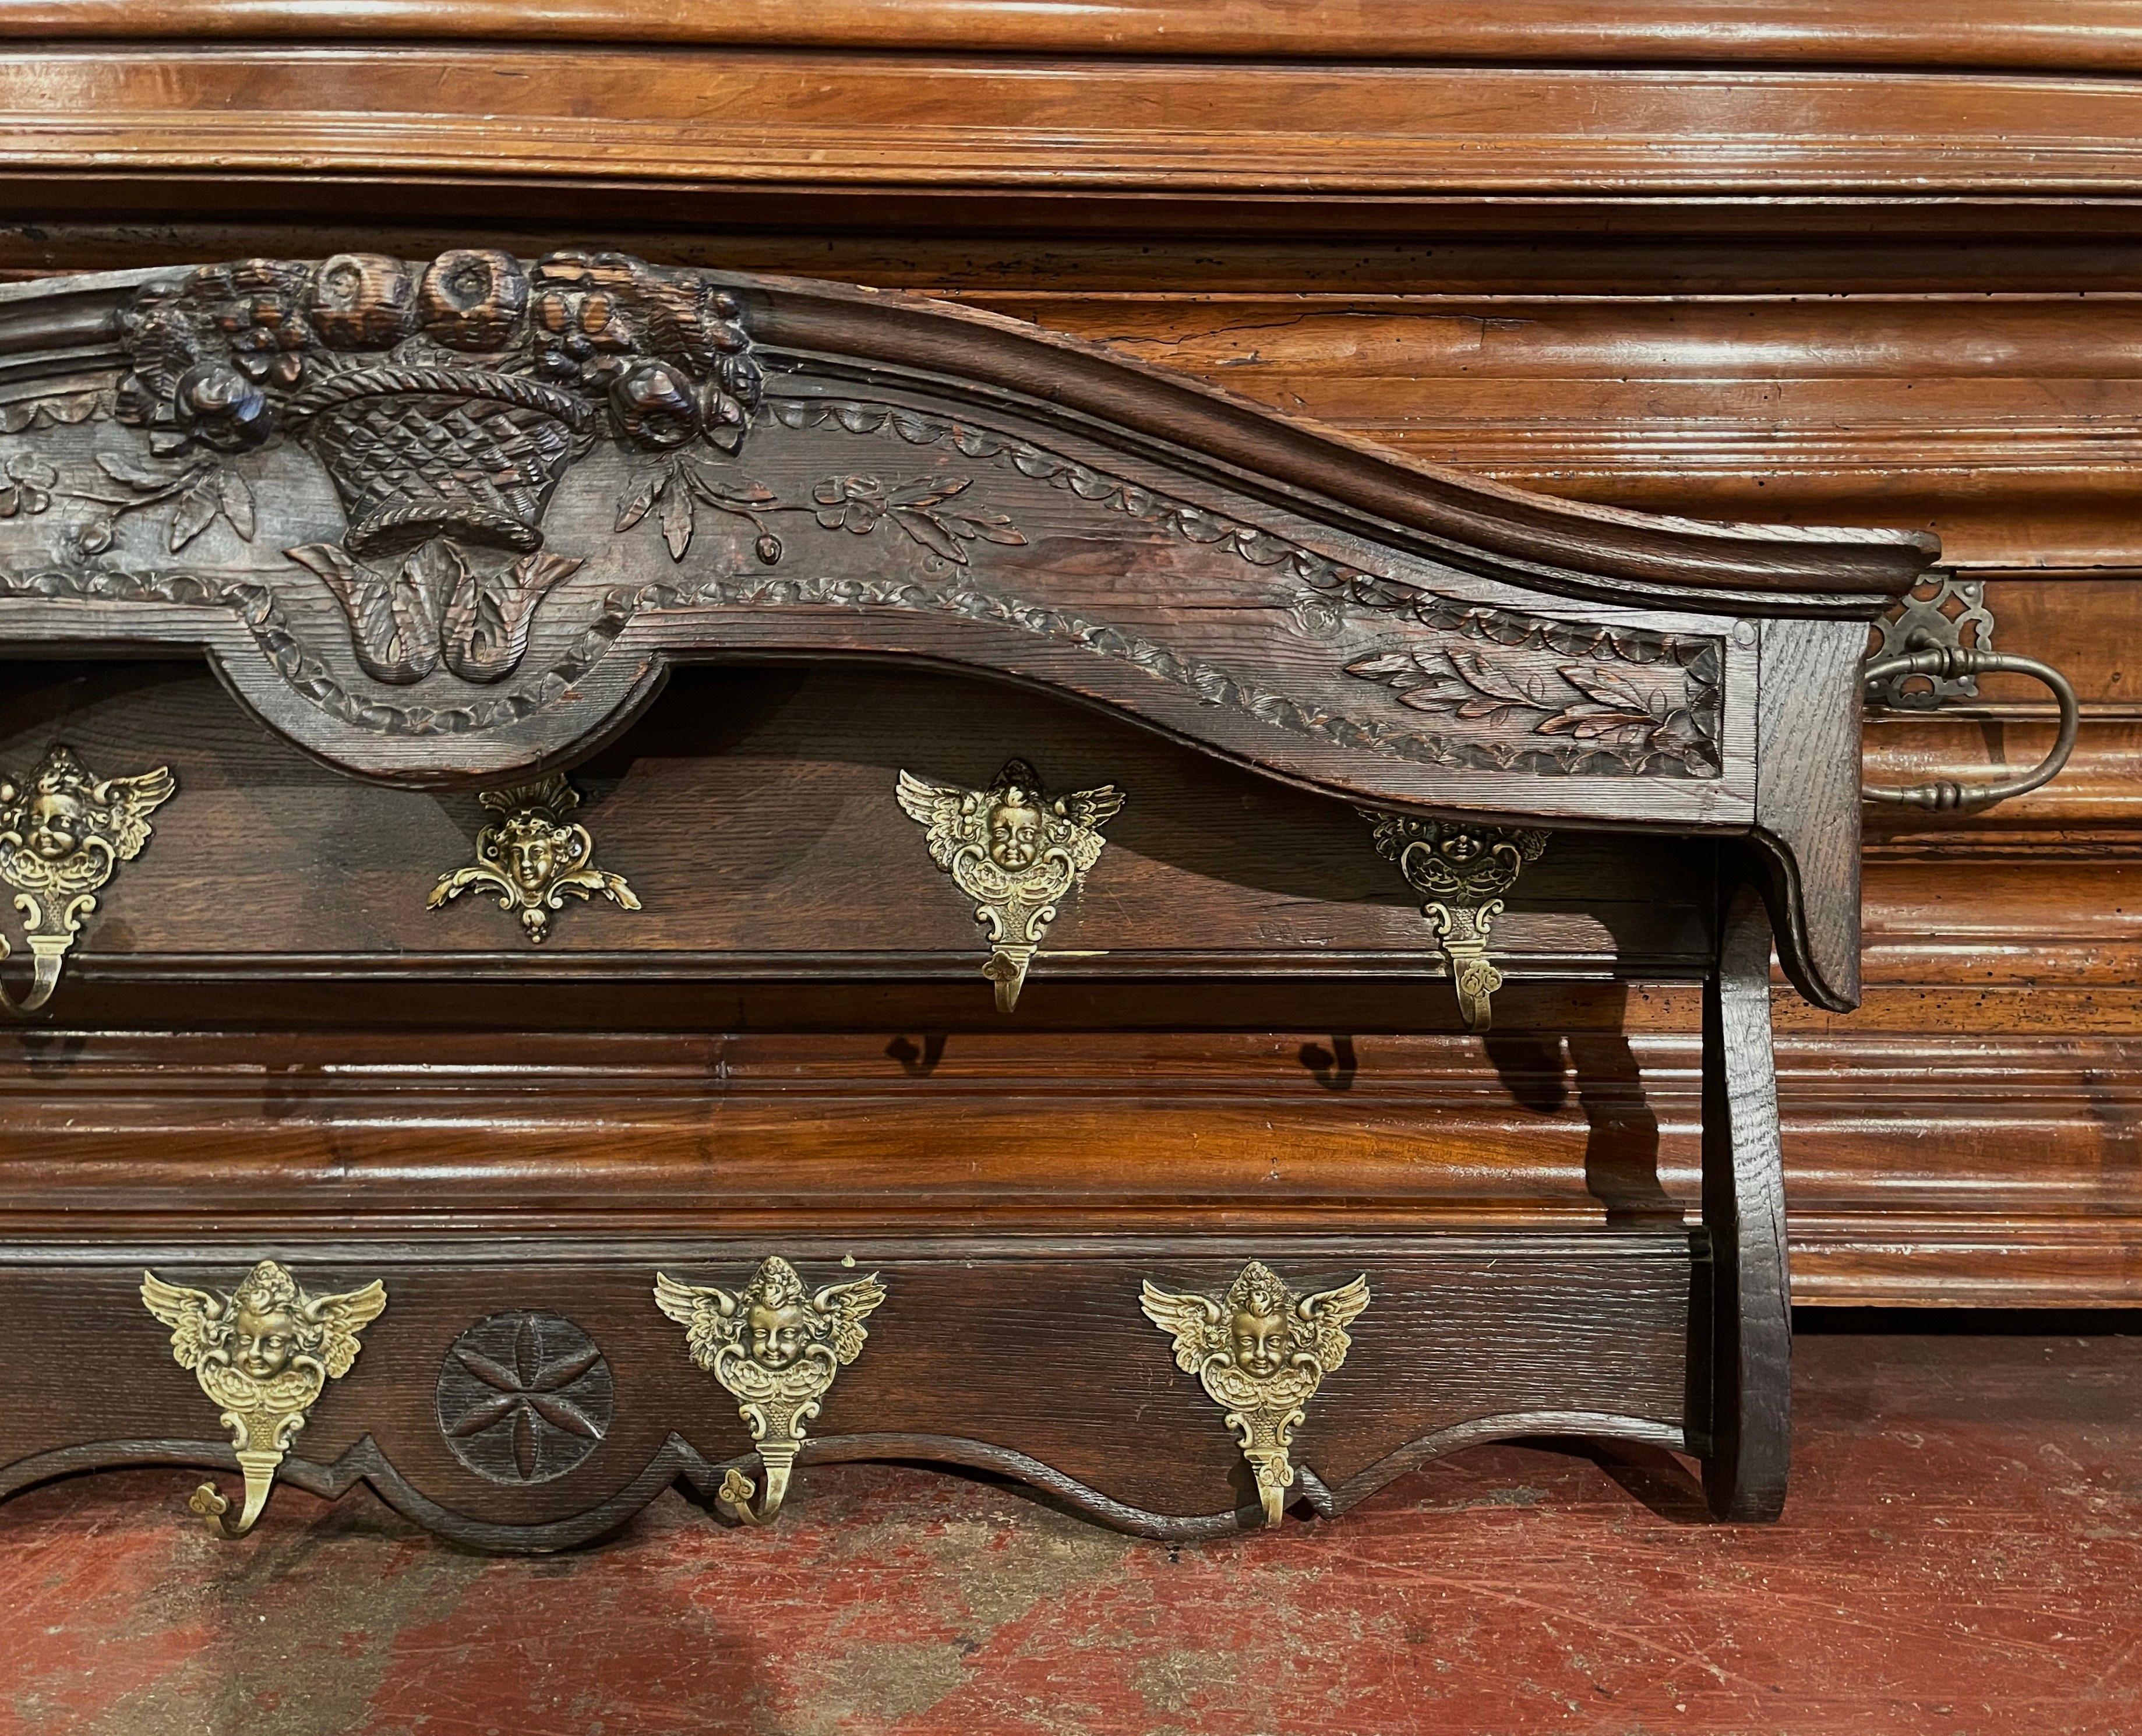 Mid-19th Century French Carved Oak Hanging Shelf with Hooks from Normandy In Excellent Condition For Sale In Dallas, TX